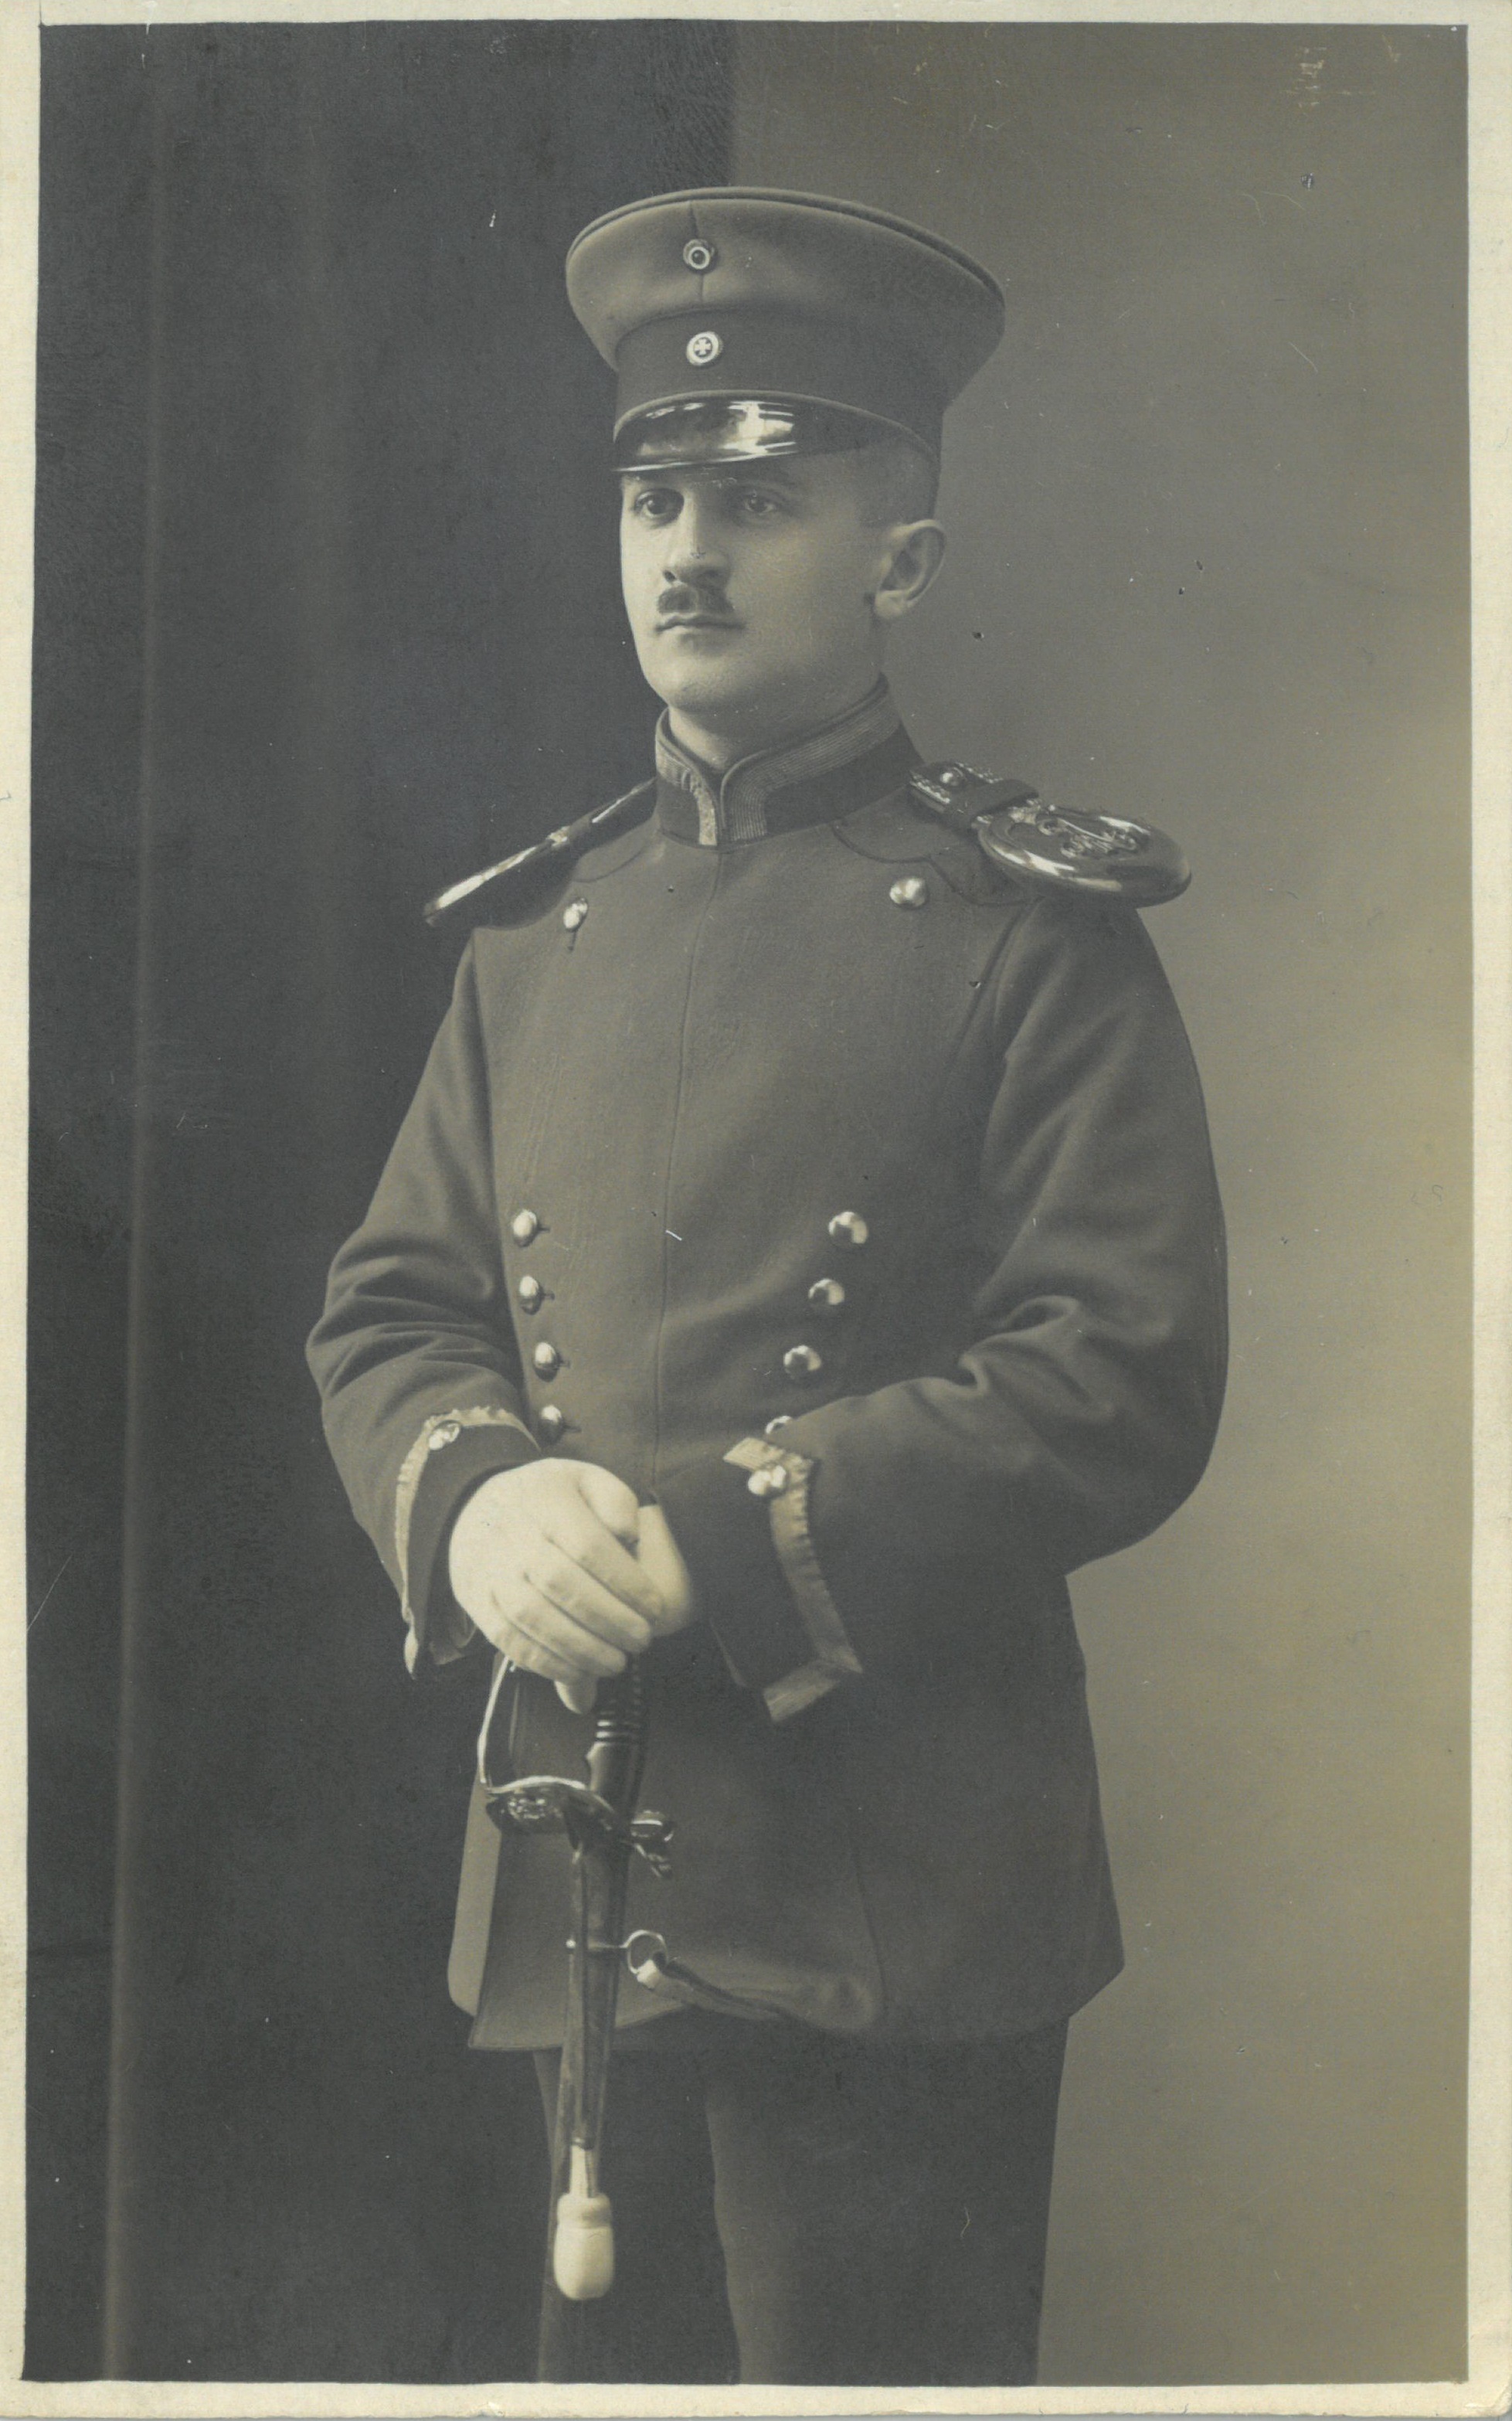 Portrait of Martin Lachmann as soldier of the German army.